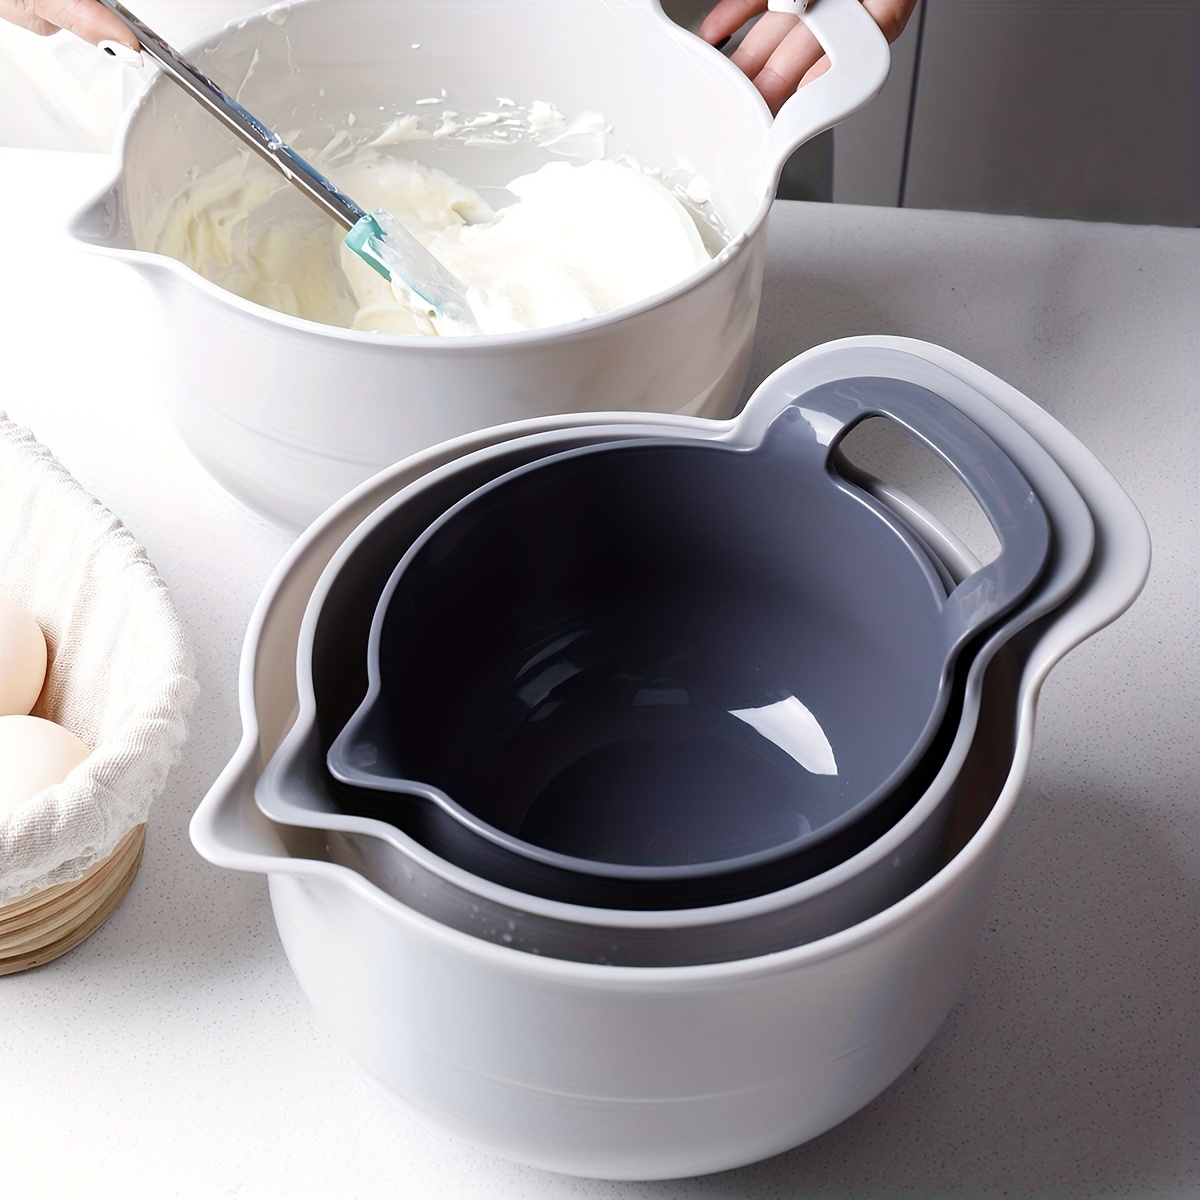 Mixing Bowls - 4 Piece Nesting Plastic Mixing Bowl Set with Pour